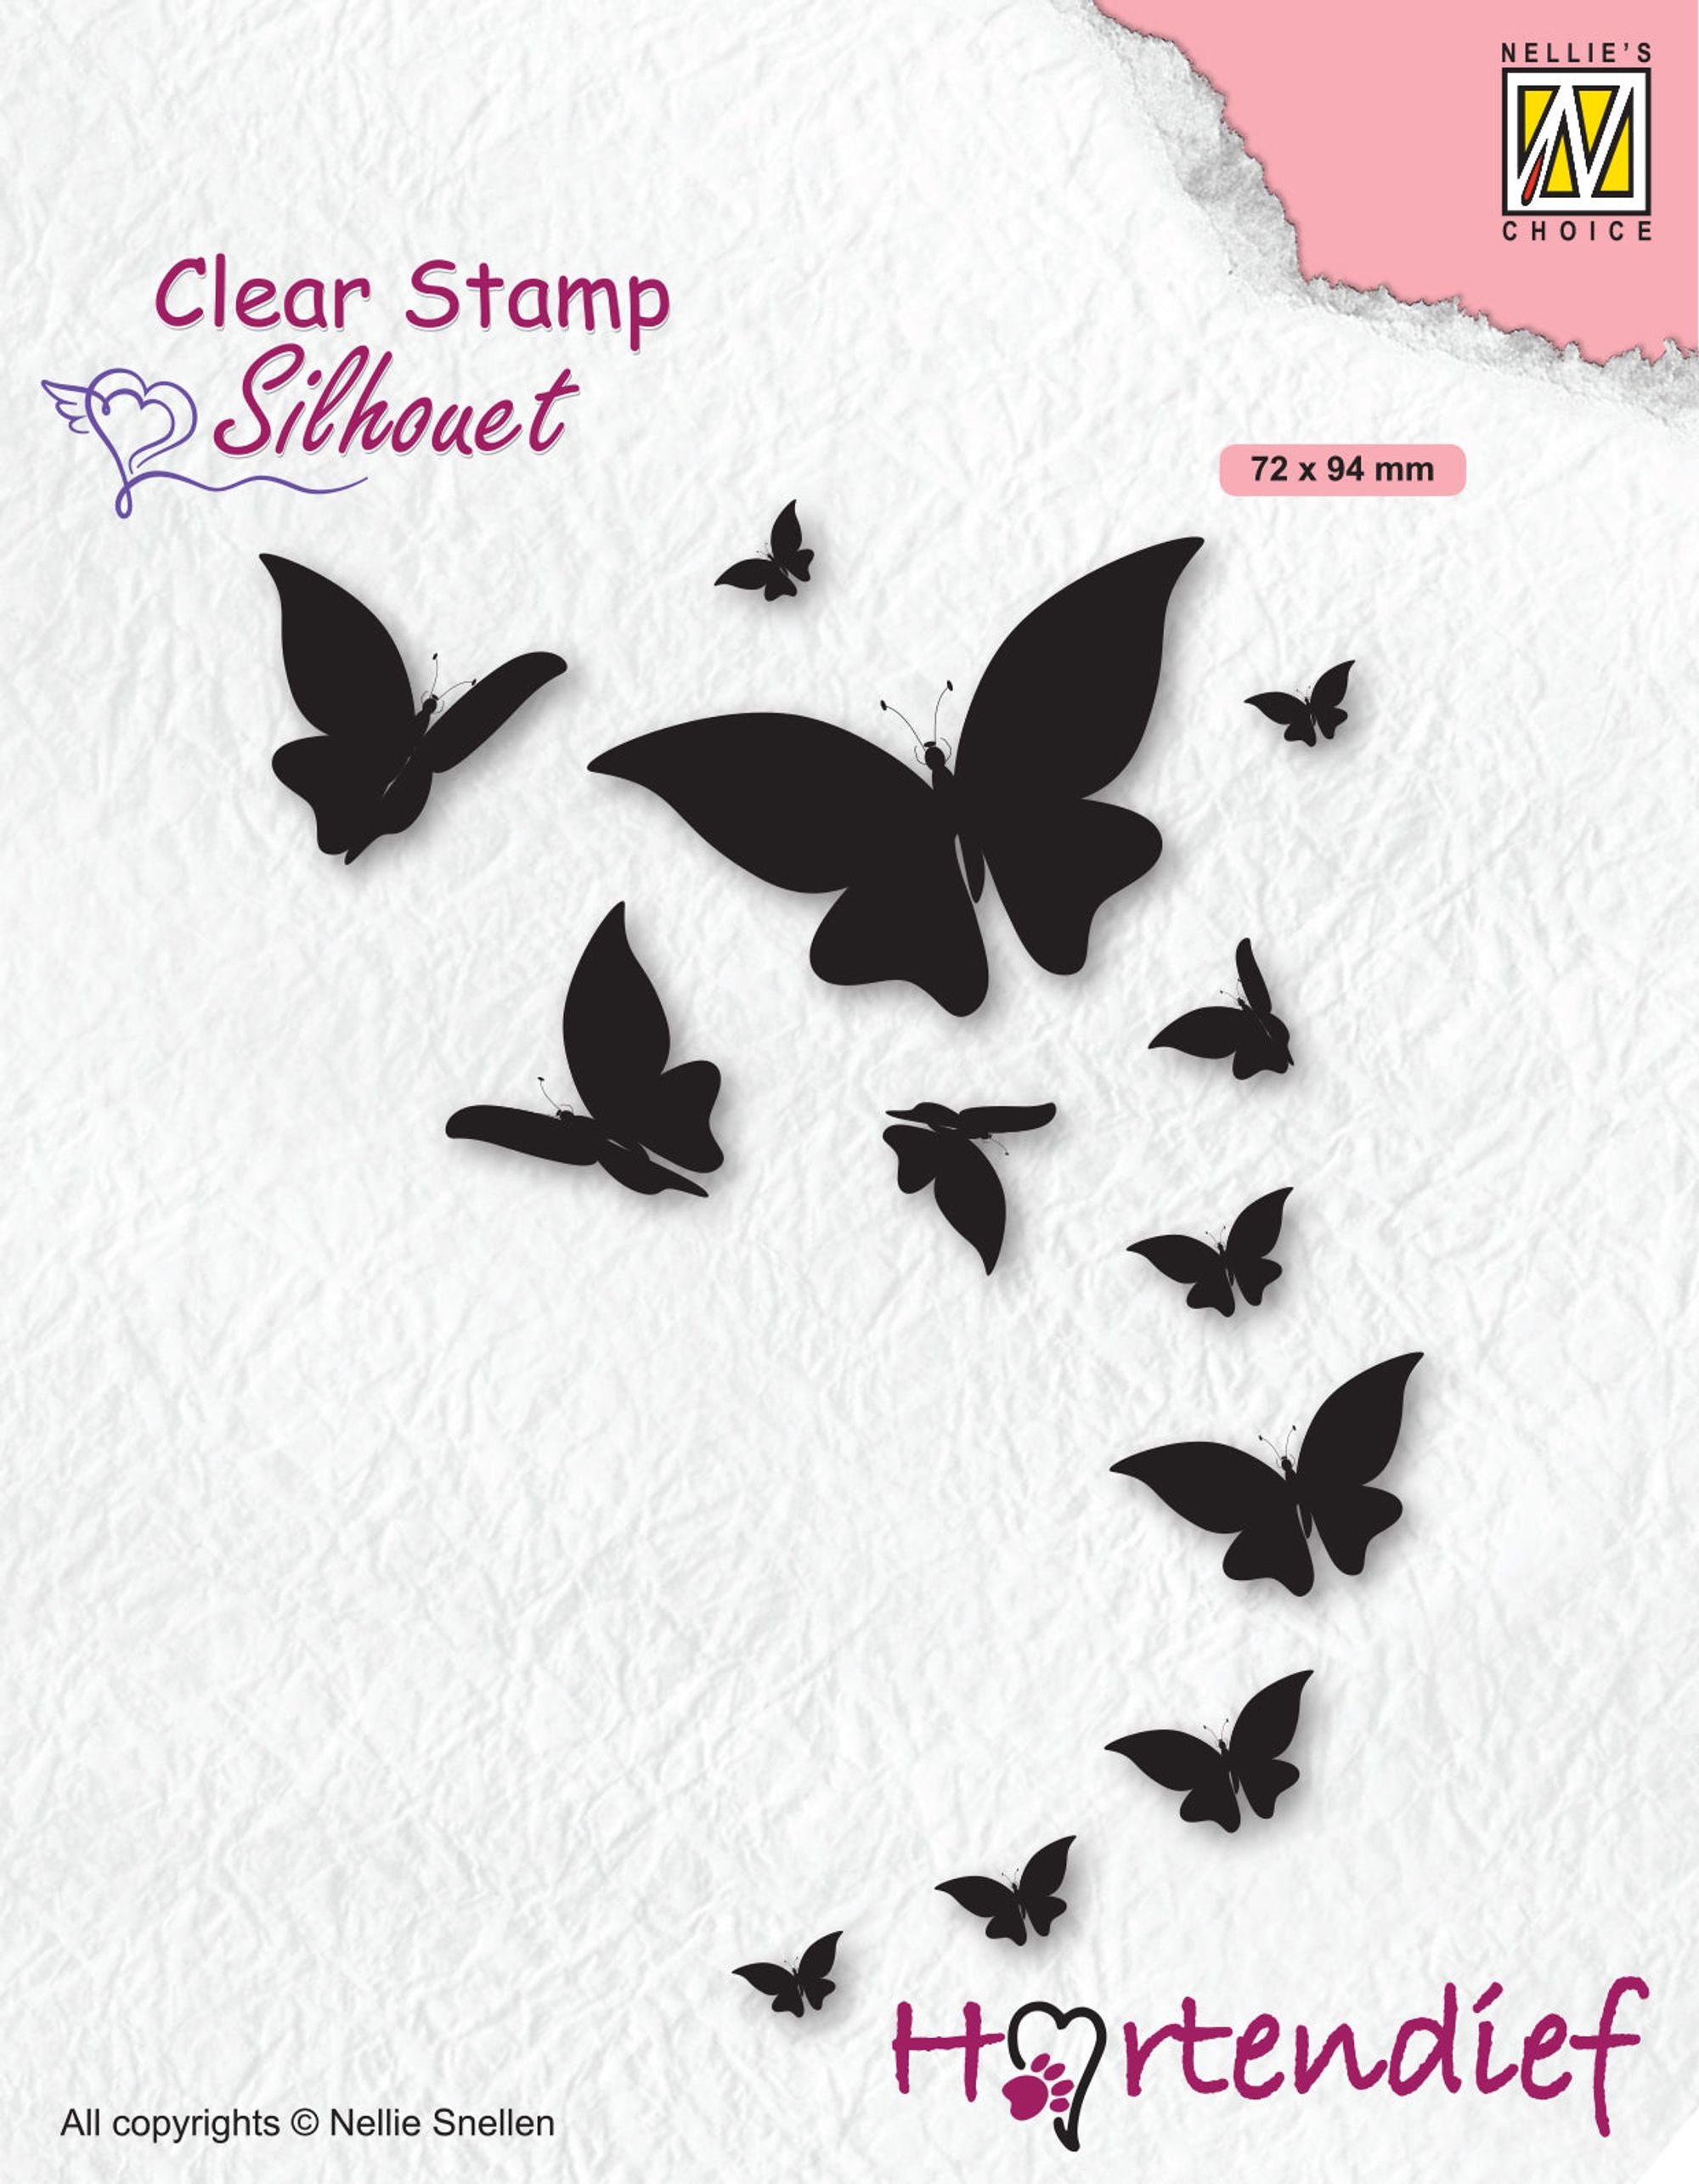 Nellie's Choice Clear Stamp Silhouette Butterflies